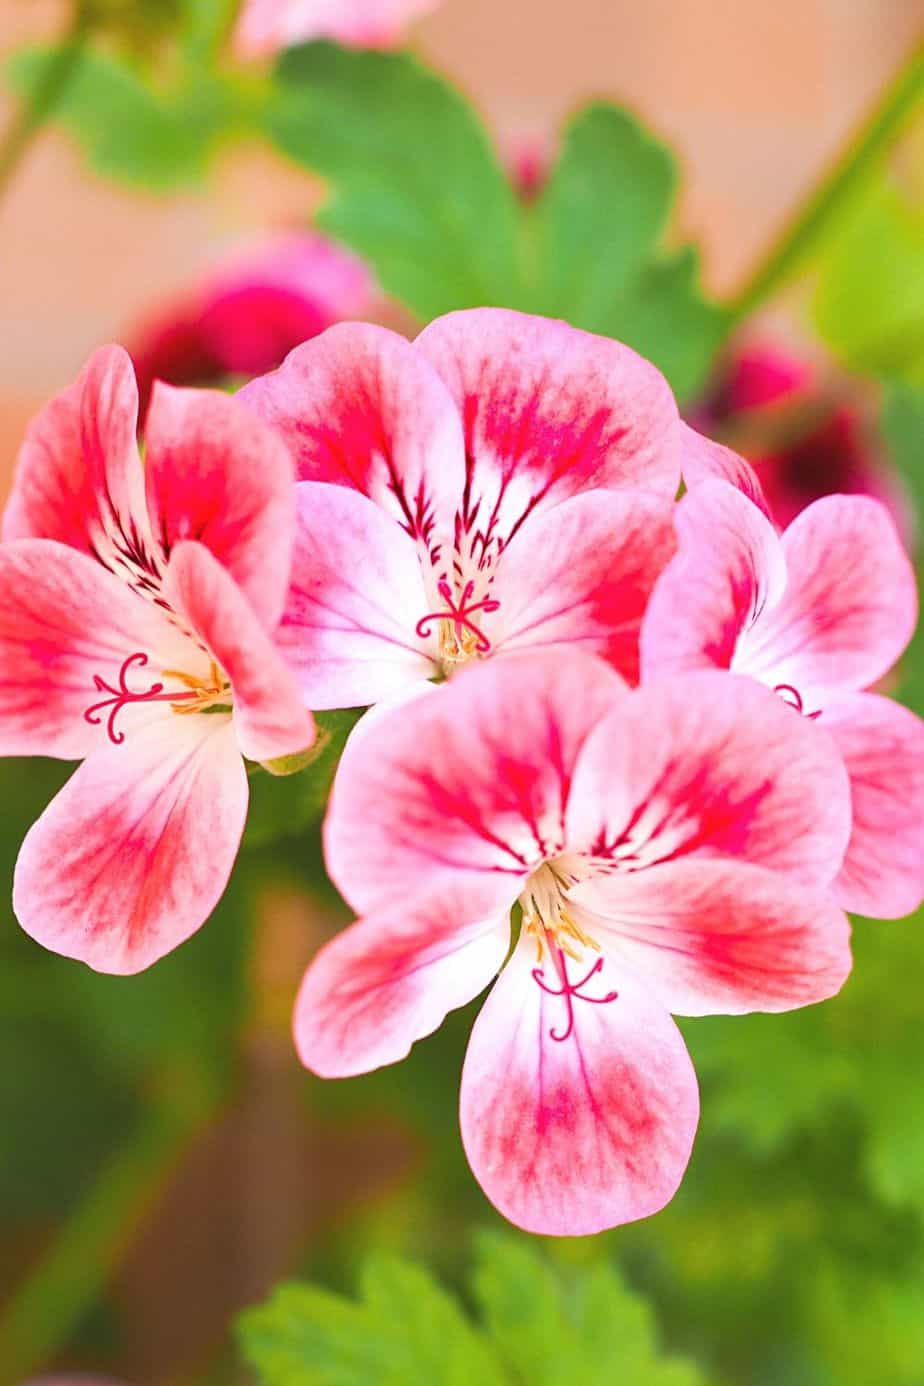 Geranium contains two compounds, linalool and geraniol, that is toxic for cats